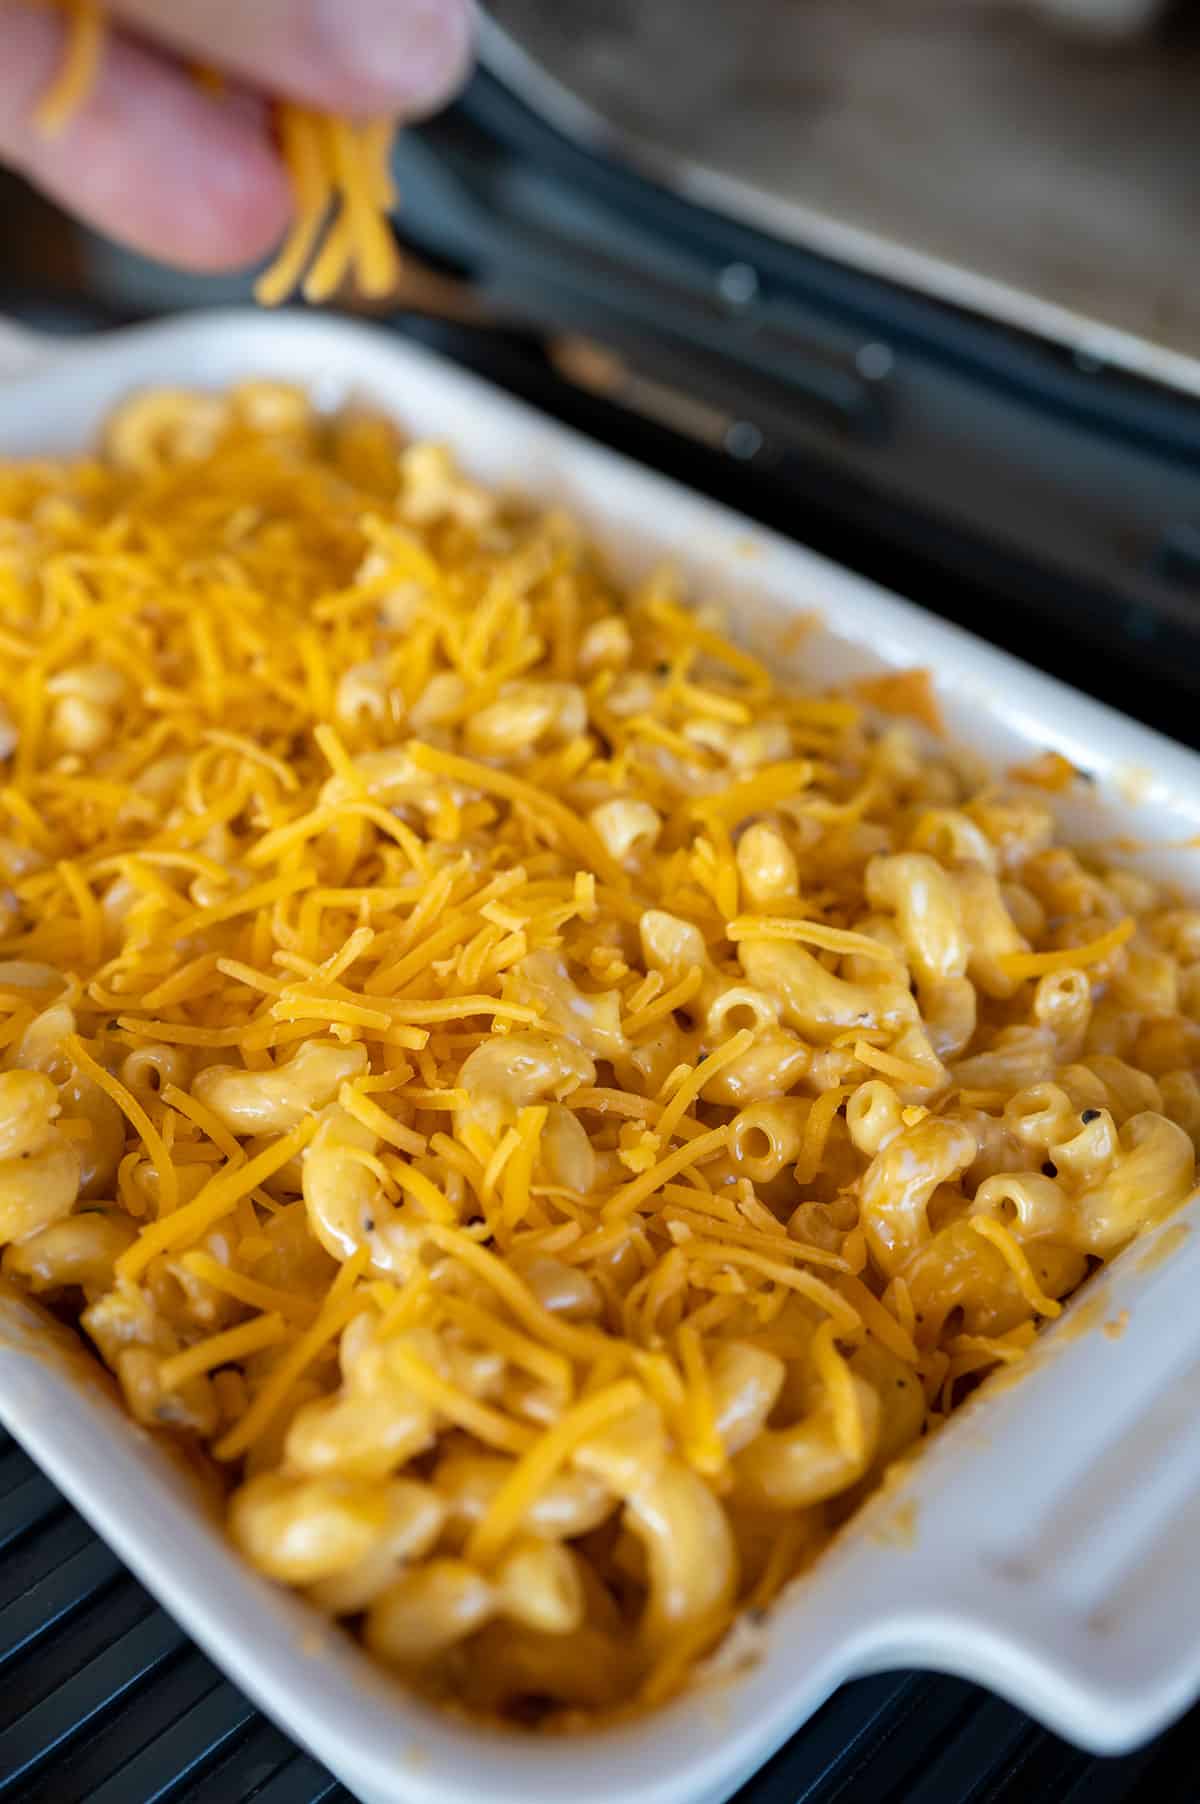 cheddar cheese sprinkled on top of dish of Smoked Mac and Cheese.